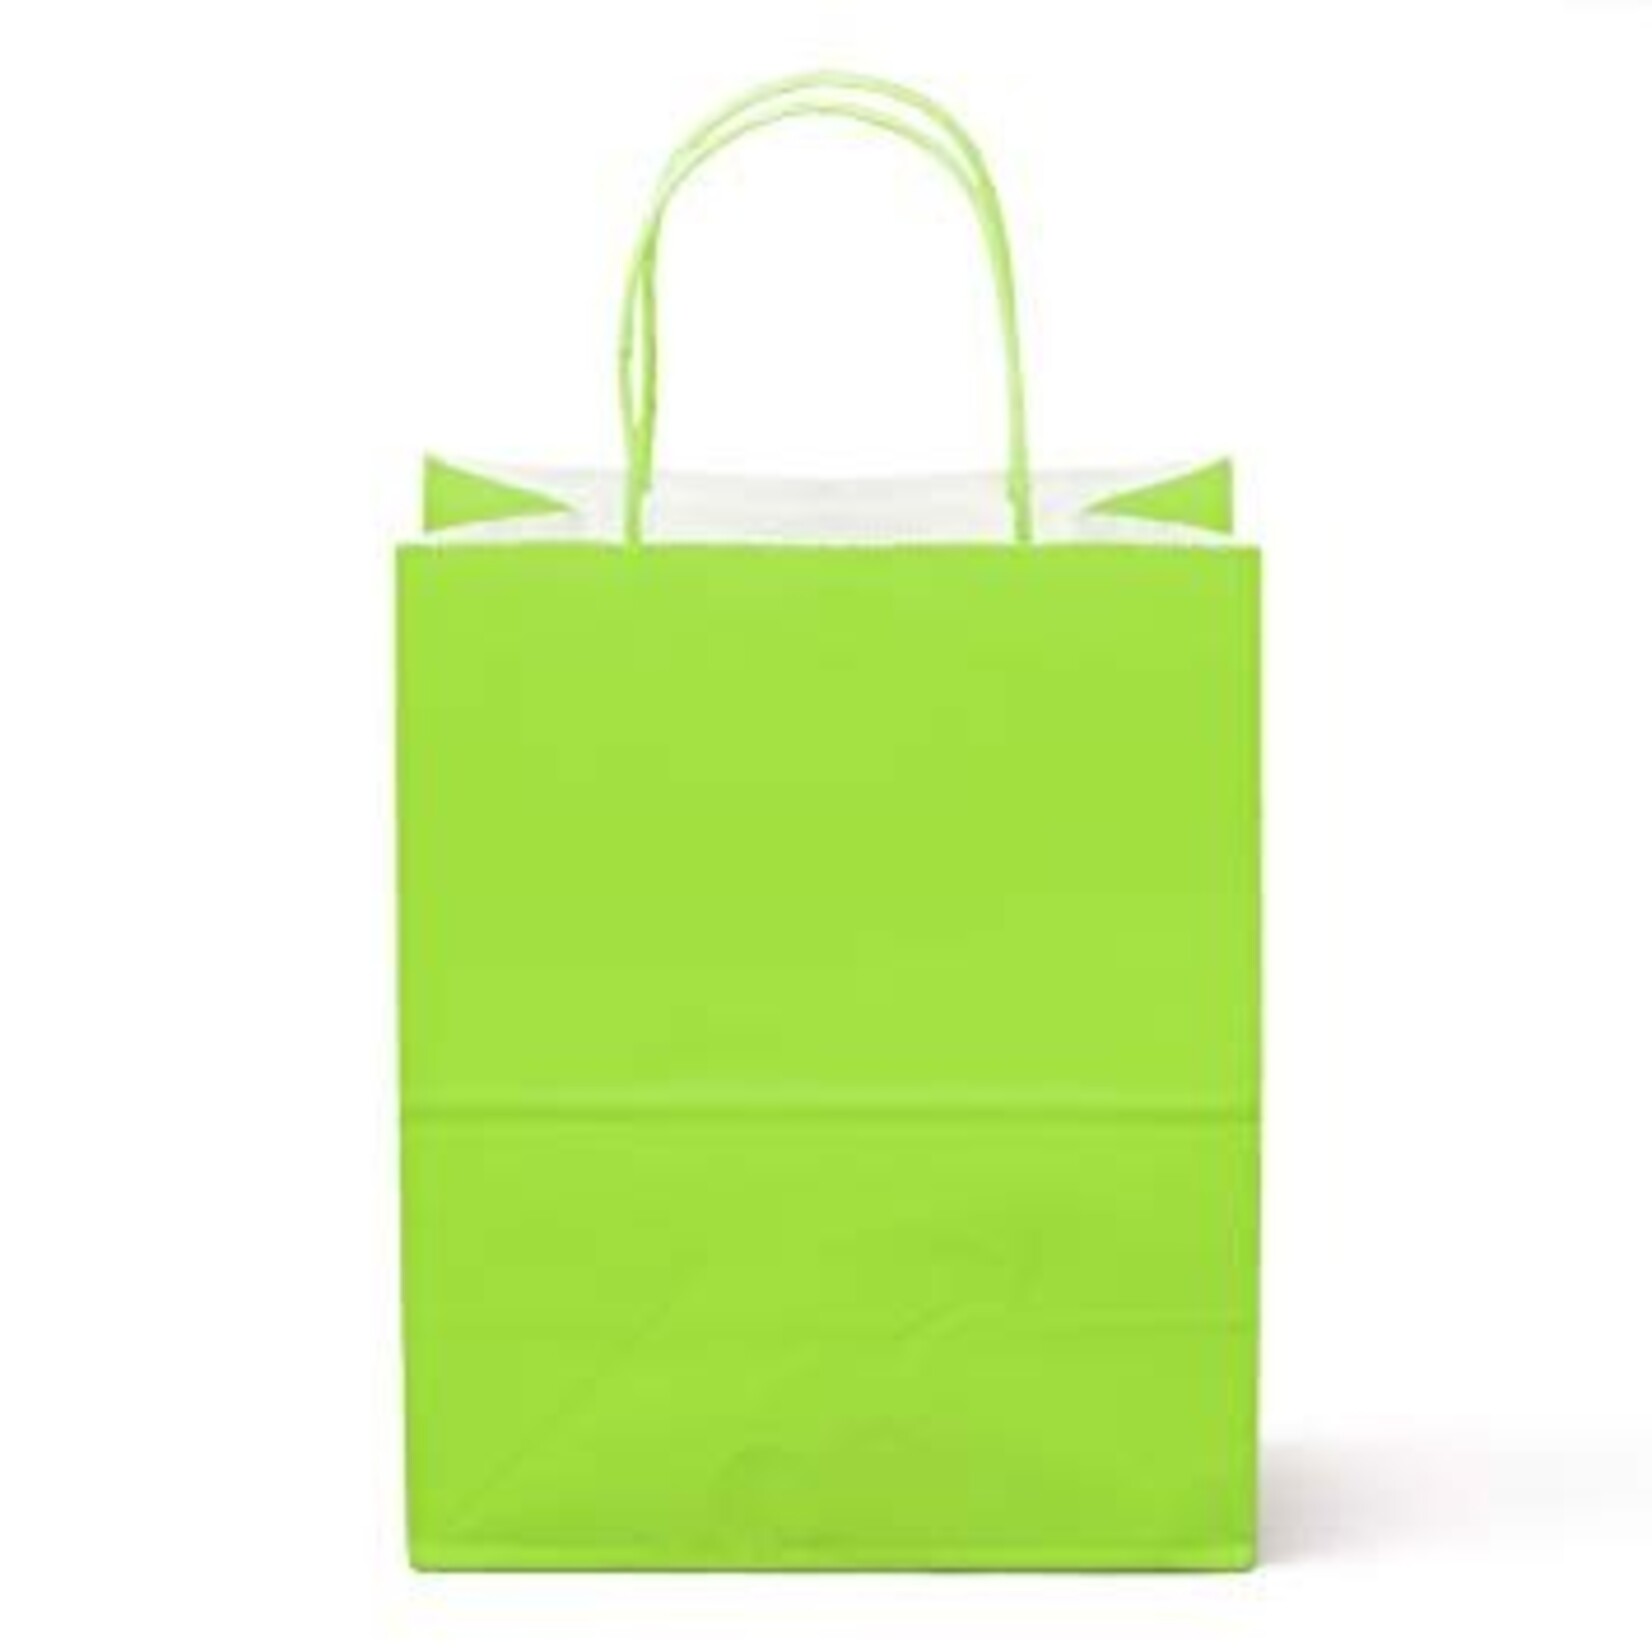 Solid Colour Favor Bags, 10ct (Natural, Blue, Pink & Apple Green)